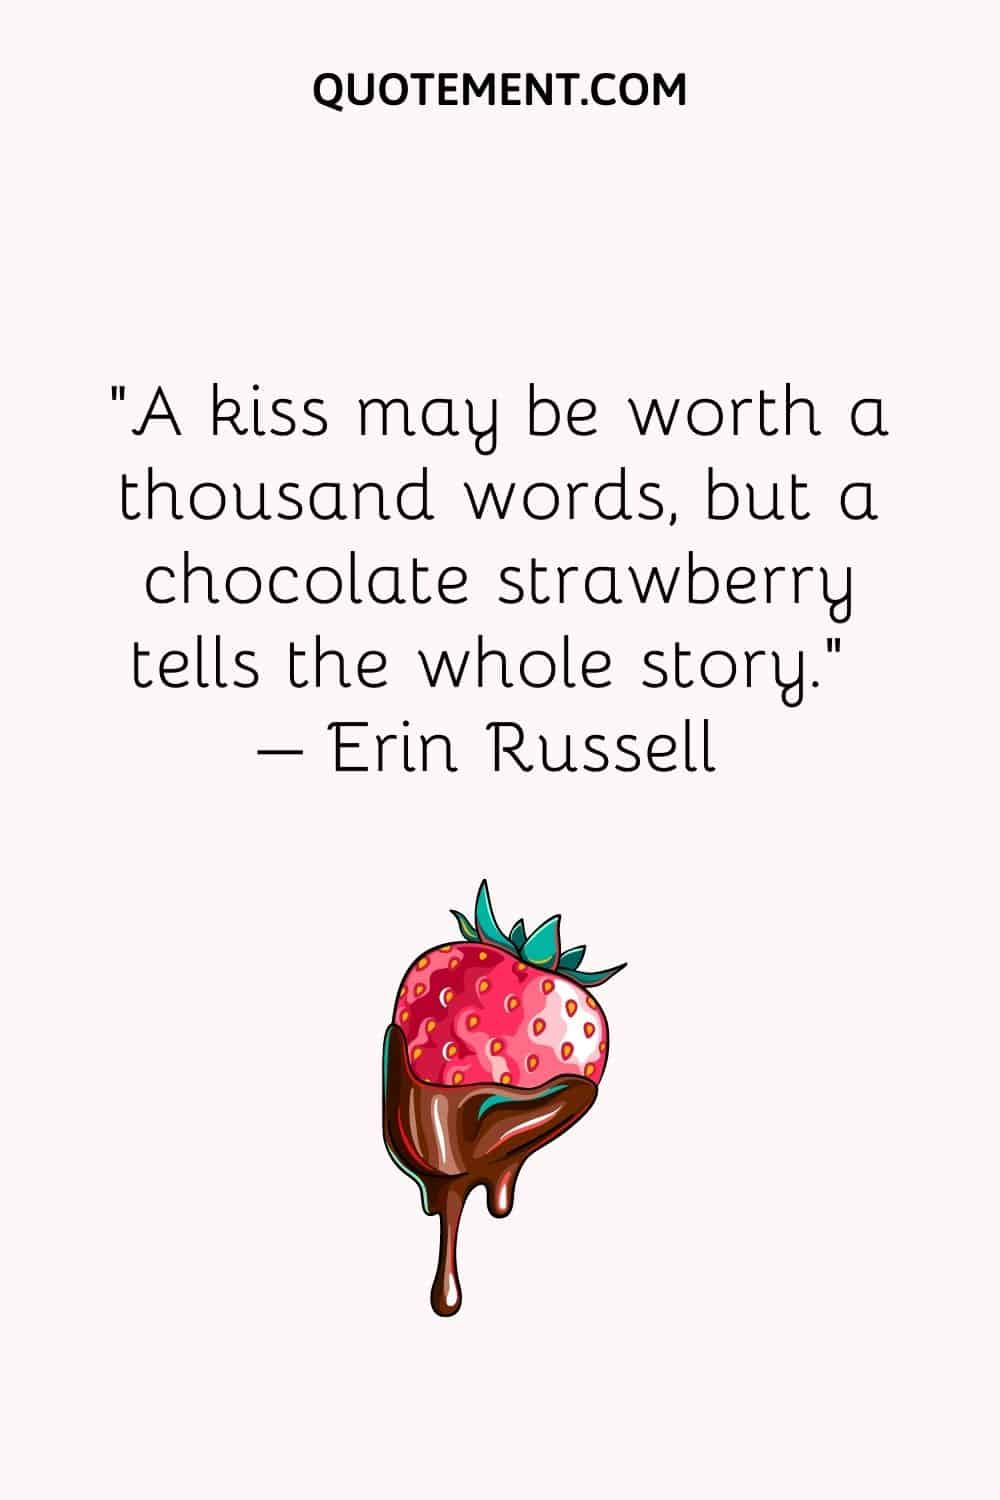 A kiss may be worth a thousand words, but a chocolate strawberry tells the whole story.